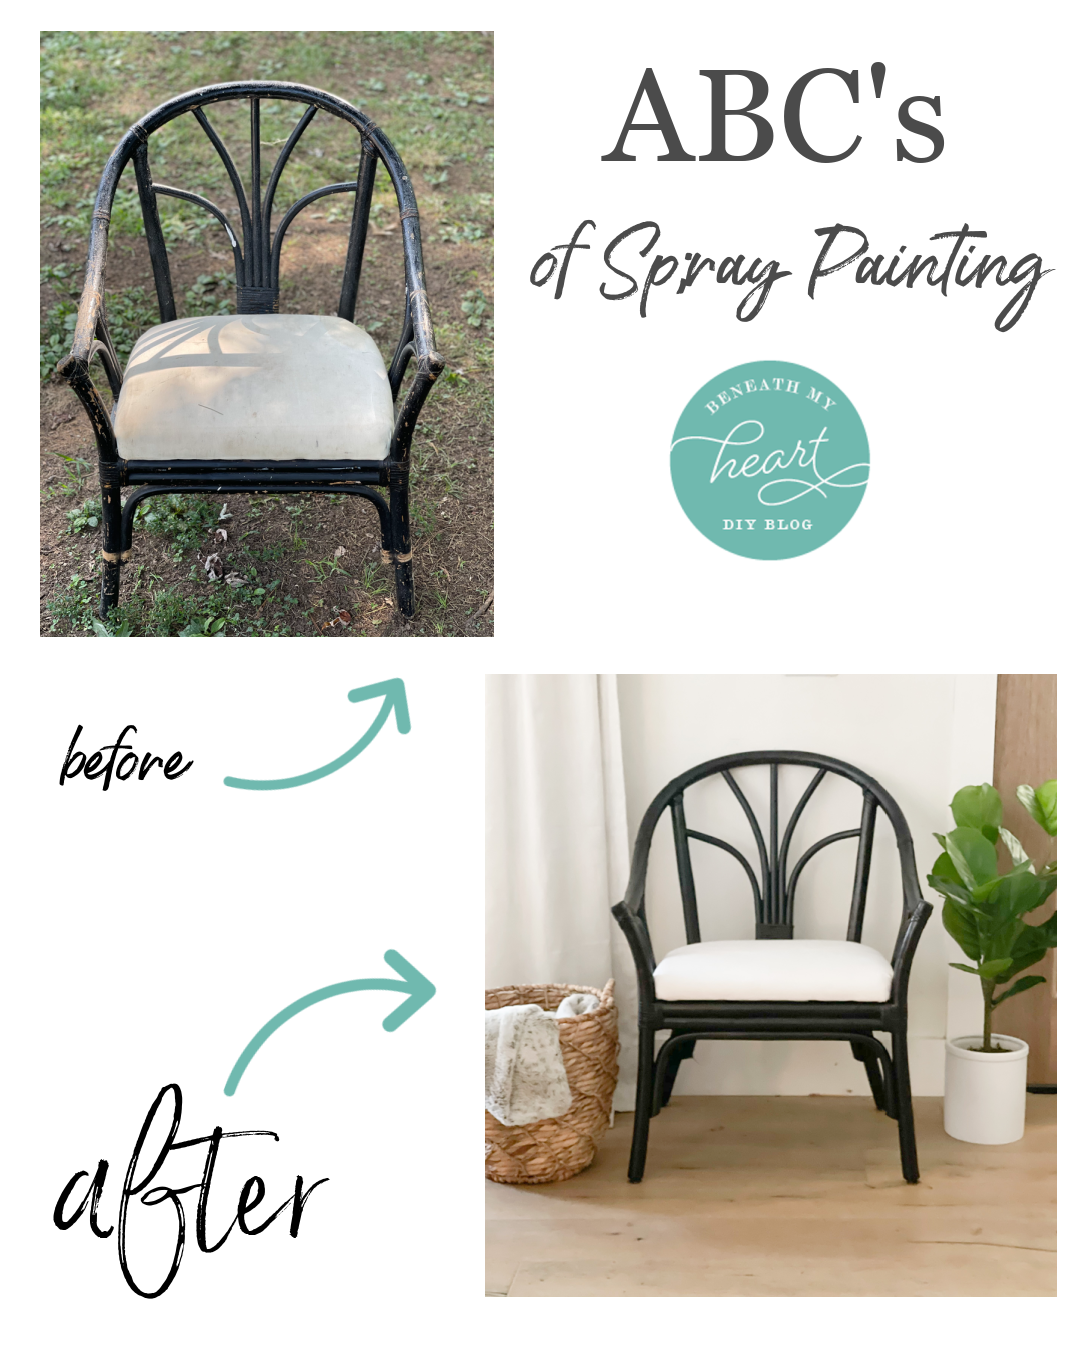 ABC’s of Spray Painting! (Chair Makeover)